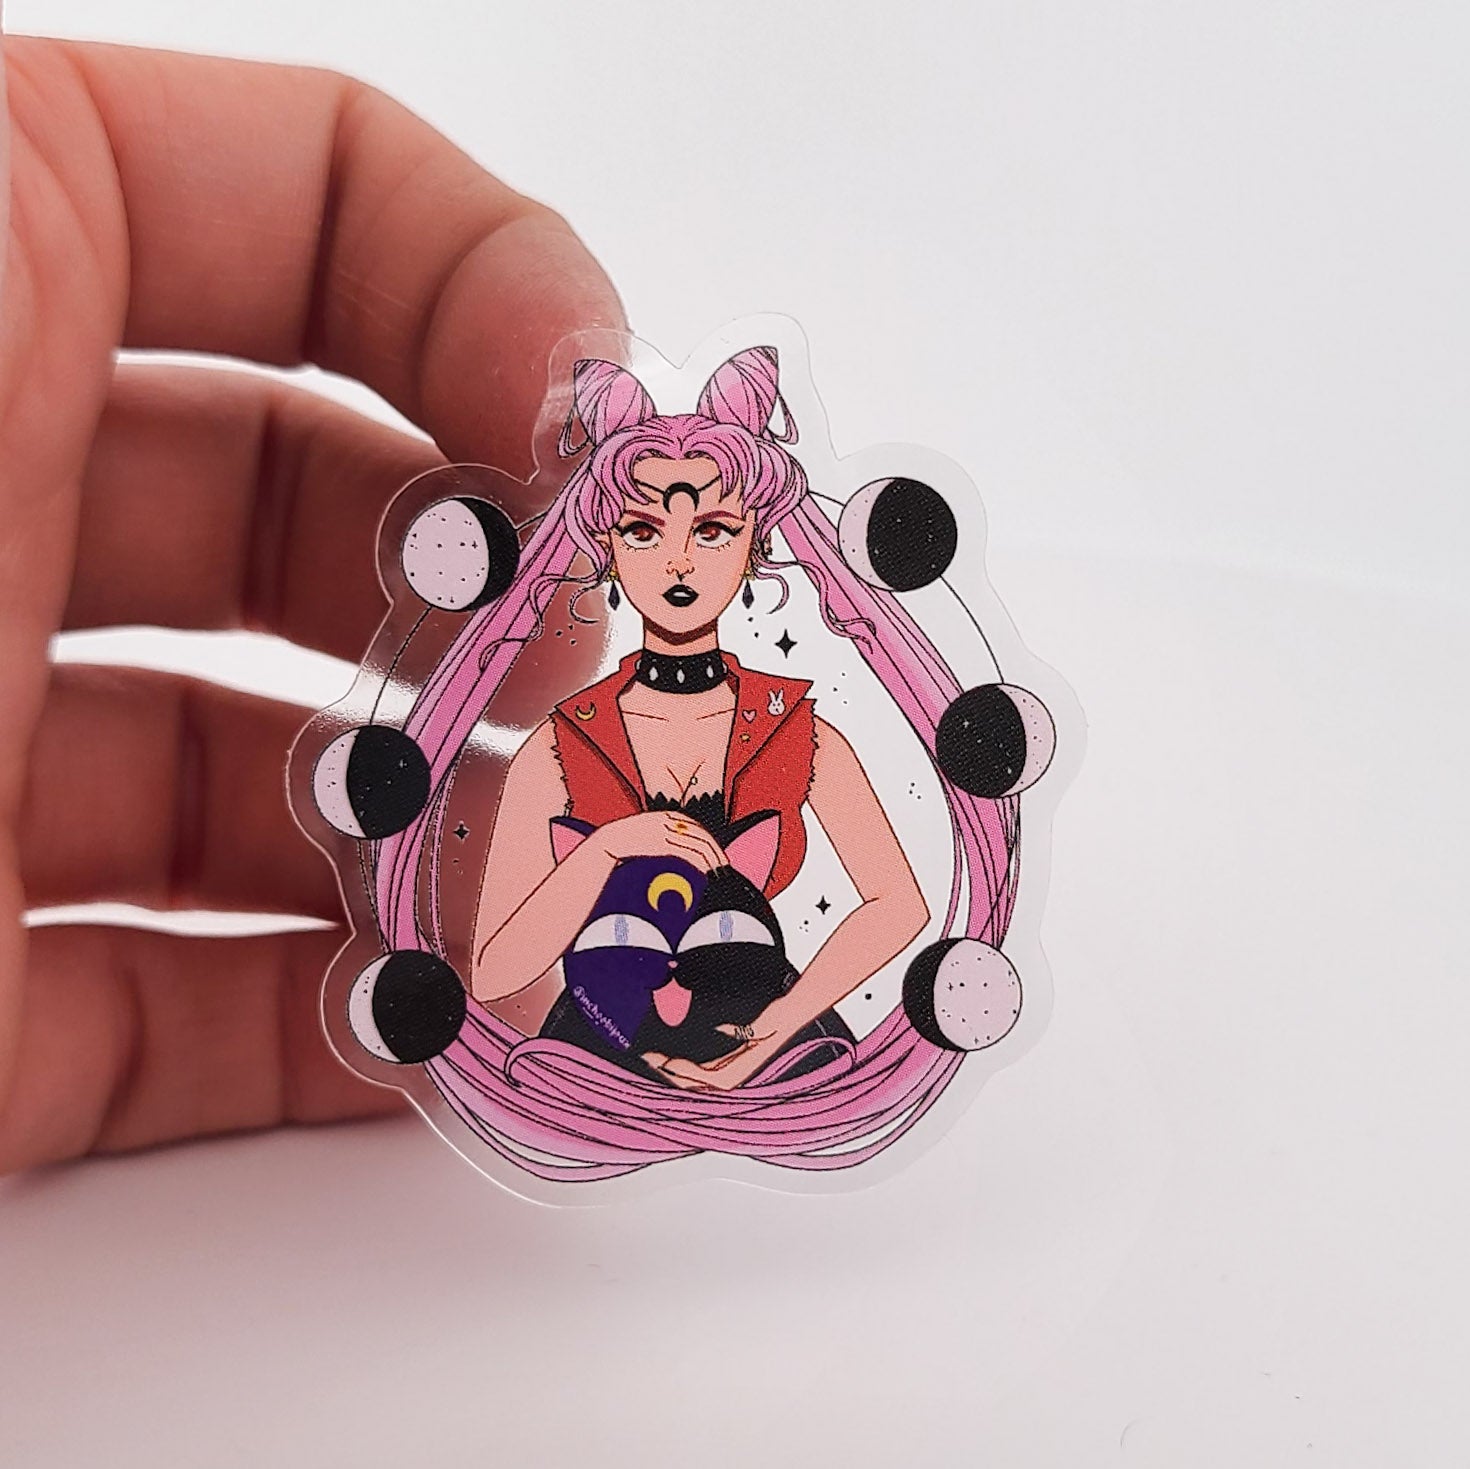 Wicked Lady - Evil Mini Moon - Punk Sailor Scout